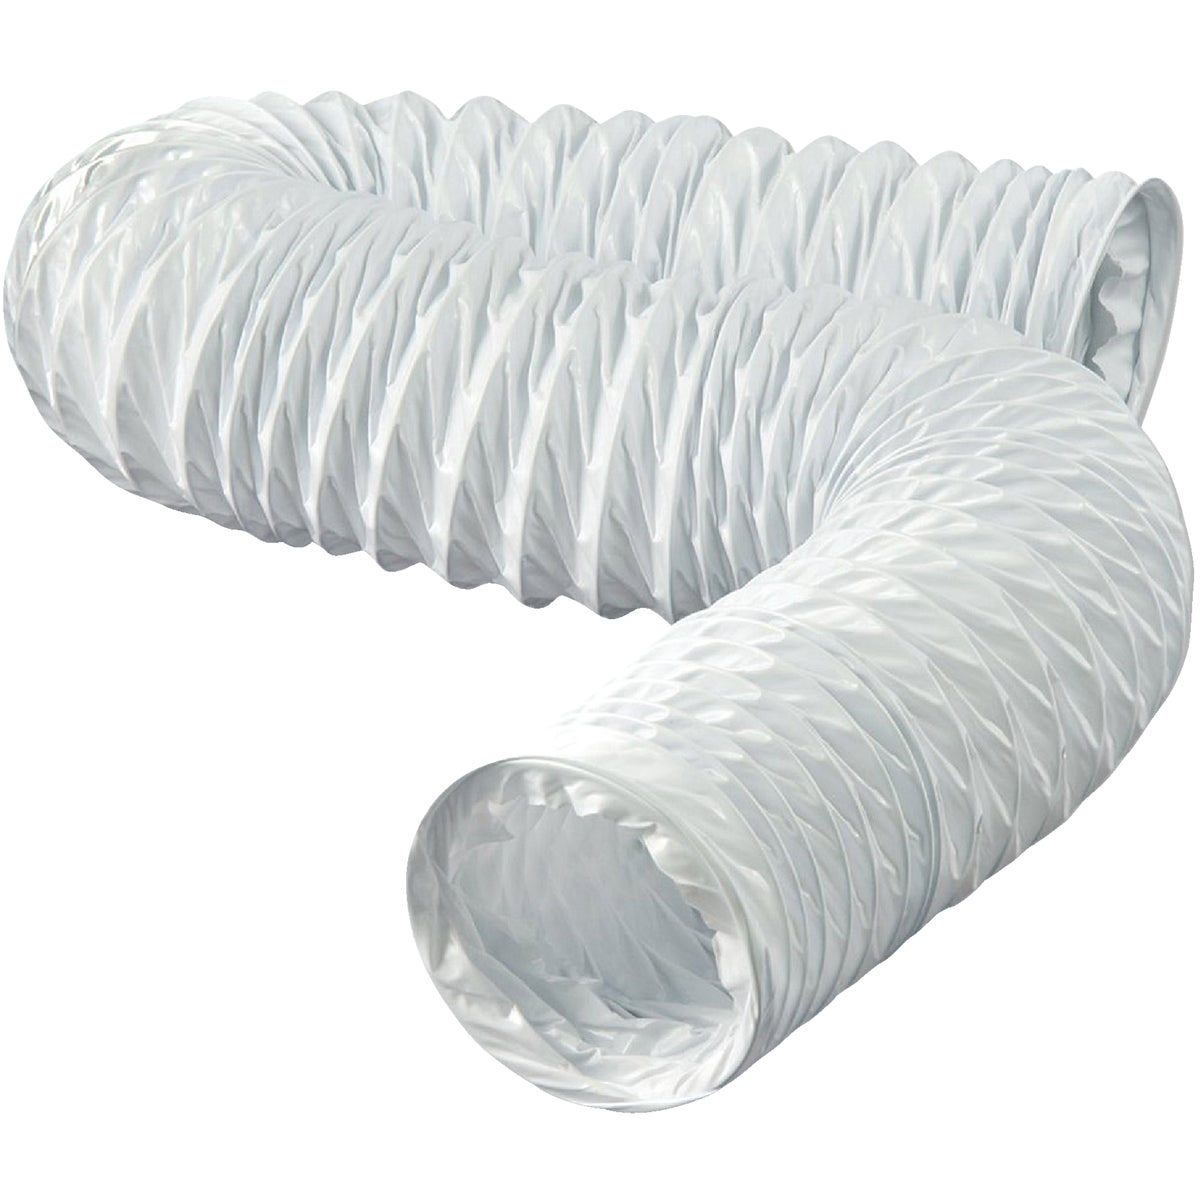 Item 284890, Flexible white vinyl duct is ideal for general purpose exhaust applications